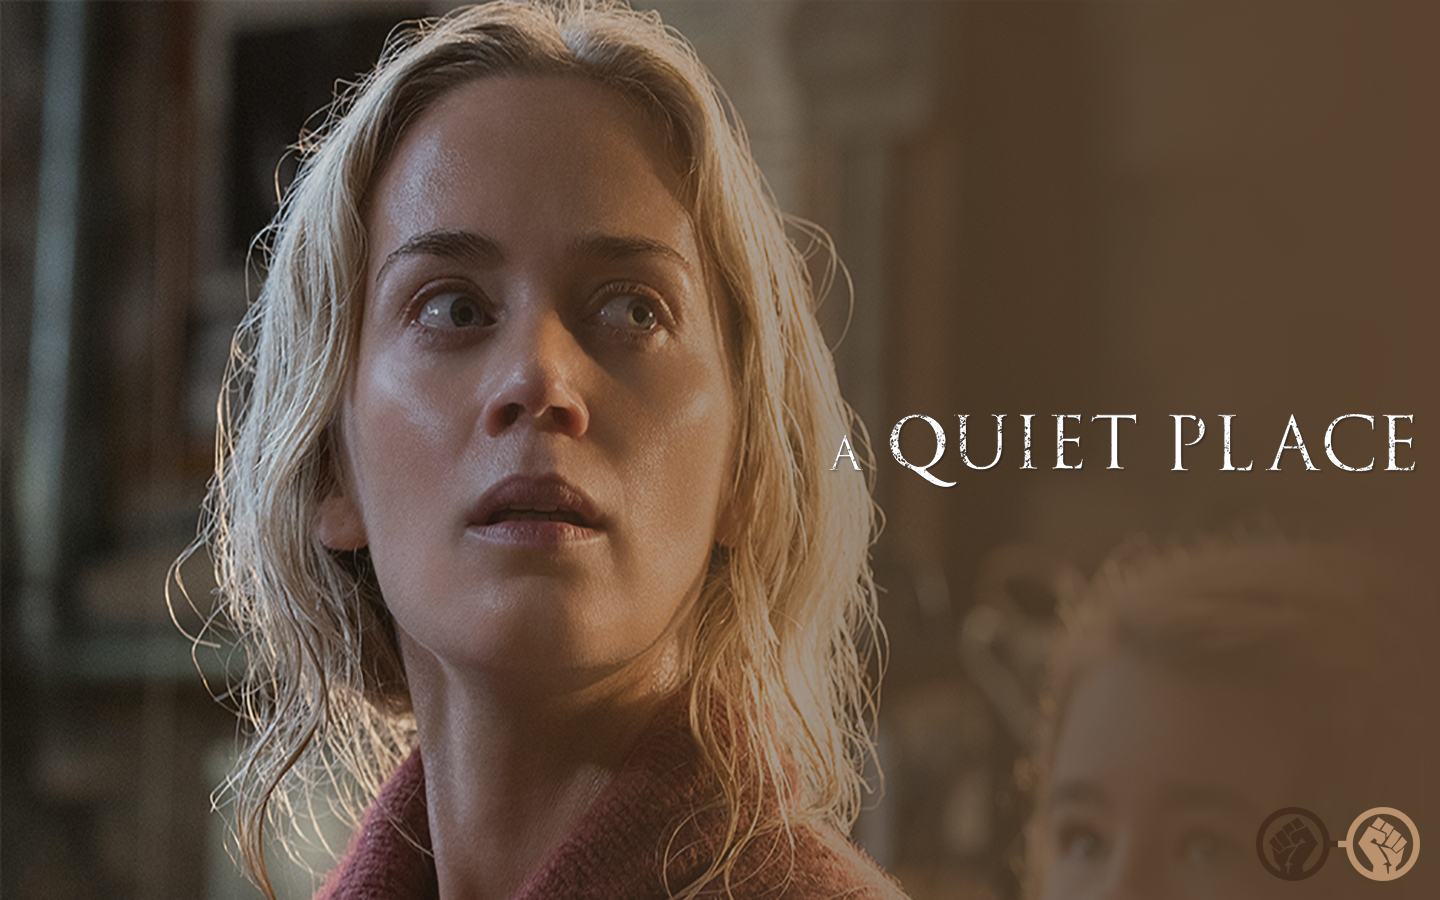 ‘A Quiet Place’ Sequel to be Released in 2020